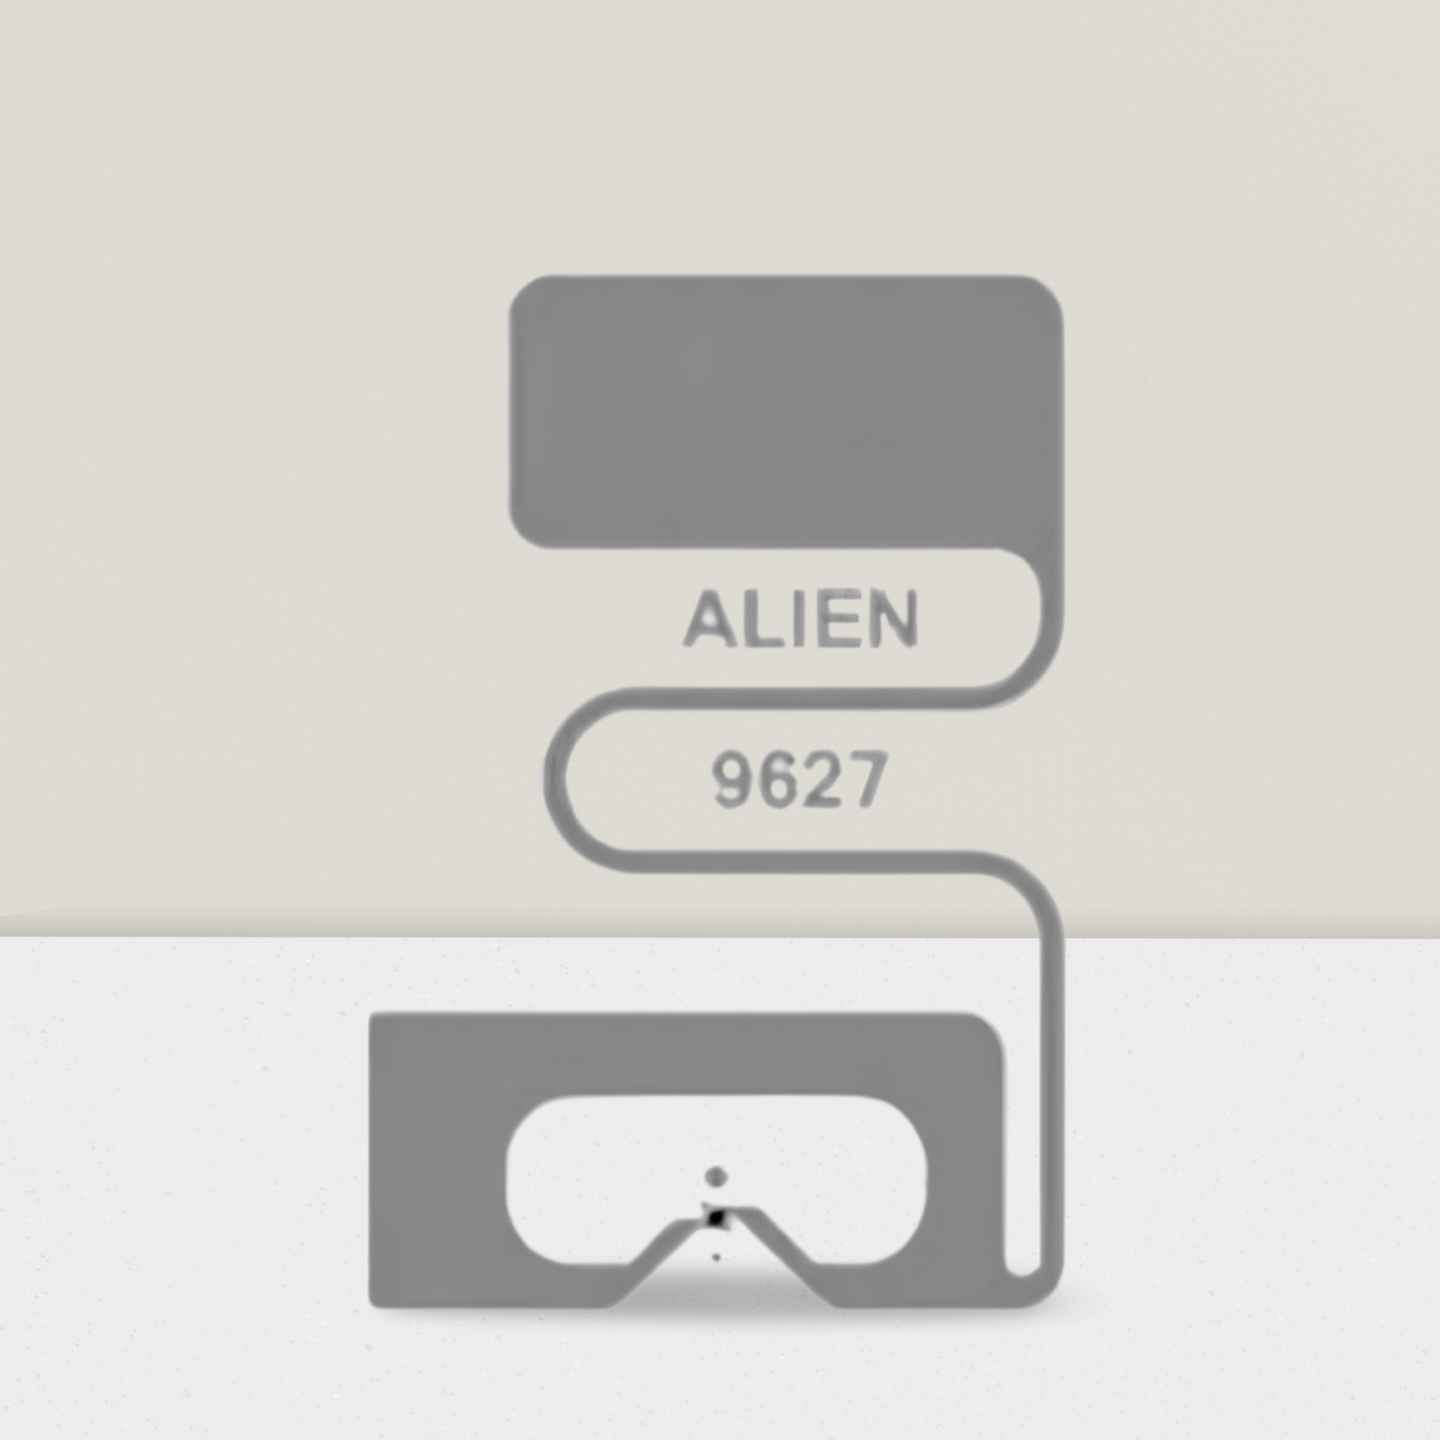 Alien Higs ALN-9627 RFID label 840-960 MHz wet inly GEN2 dry inlay